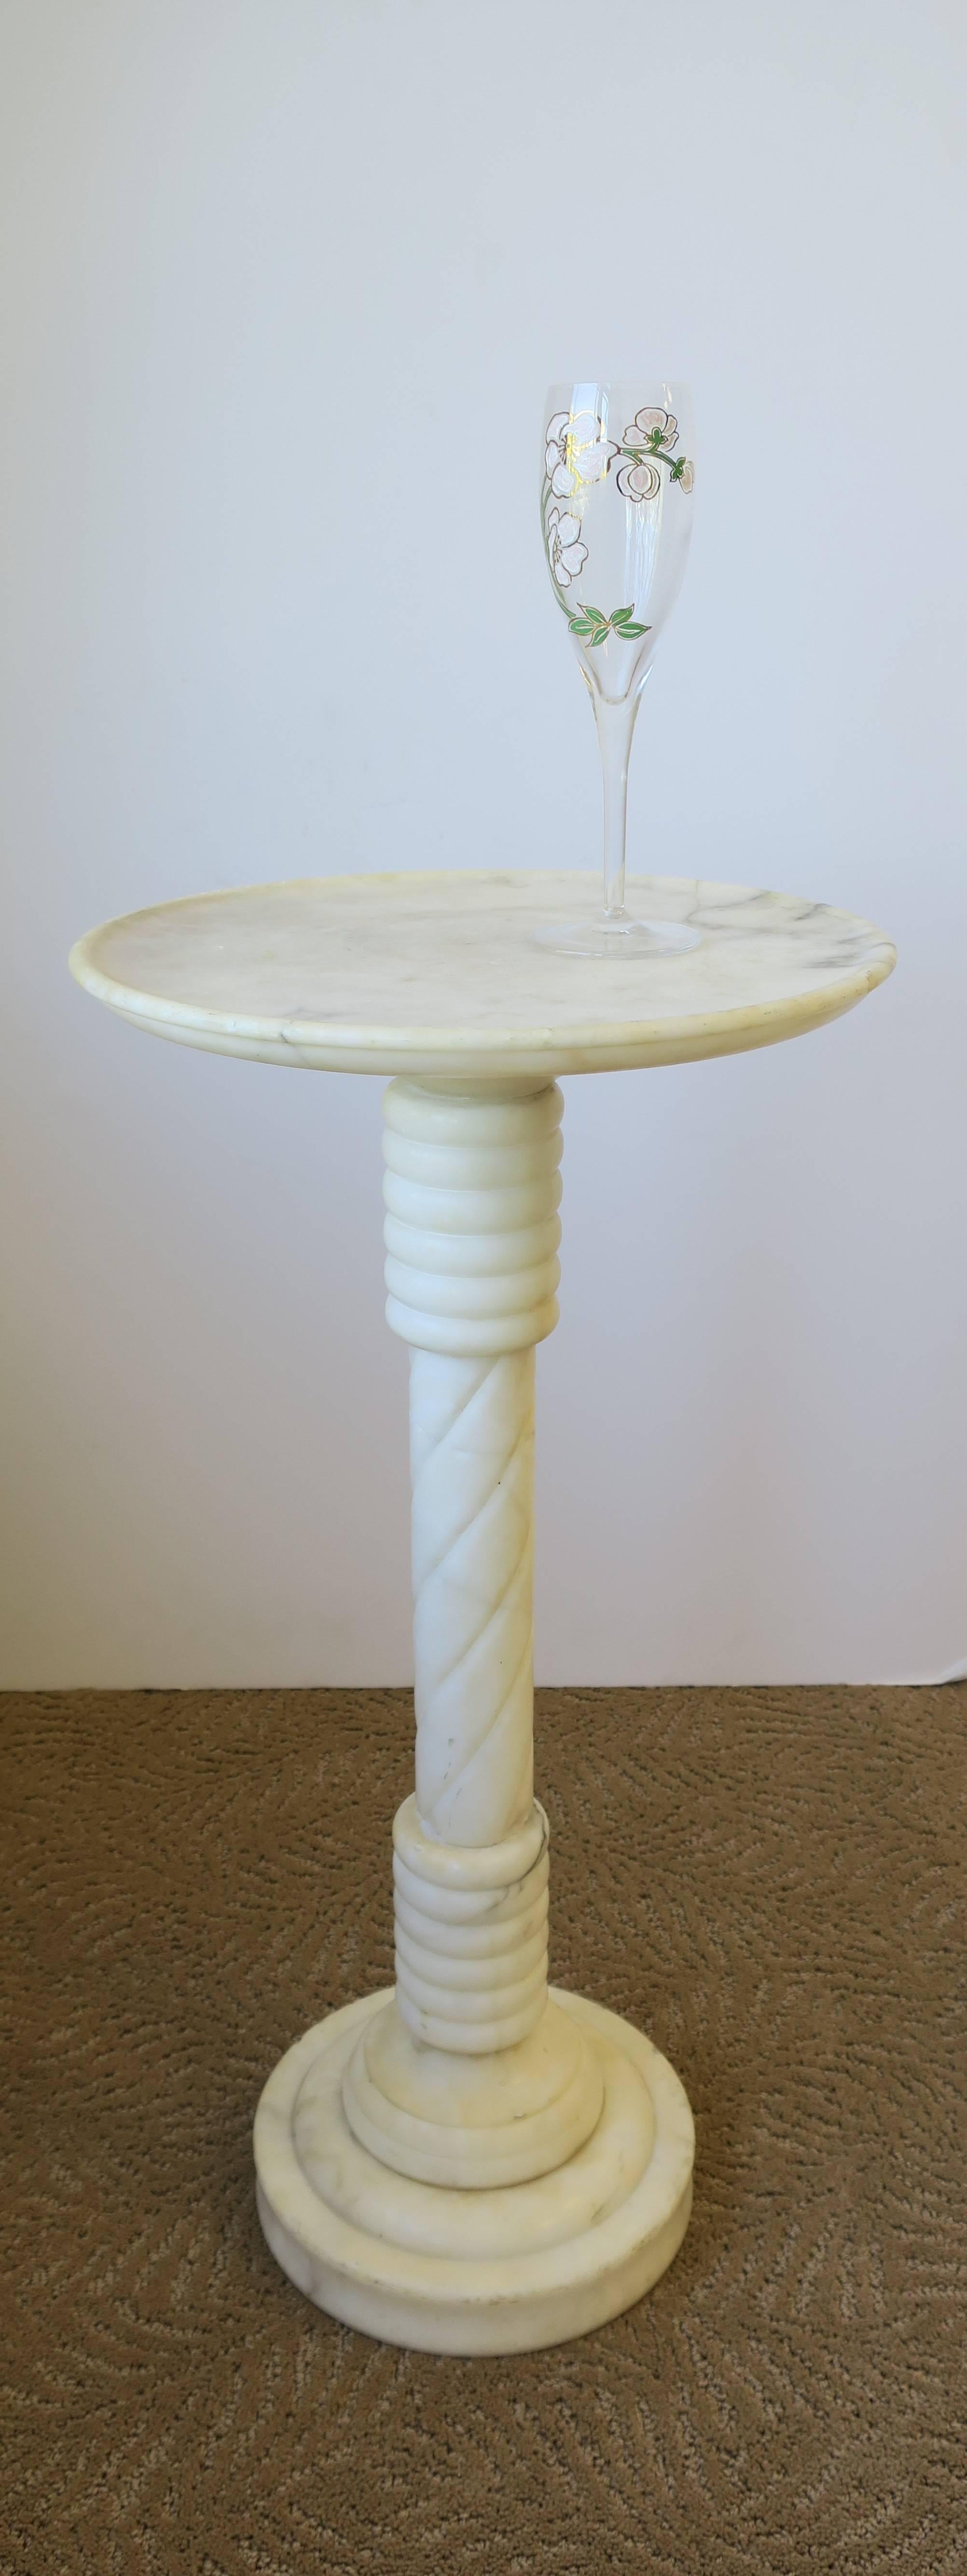 Italian Modern White and Black Marble Side Table 1